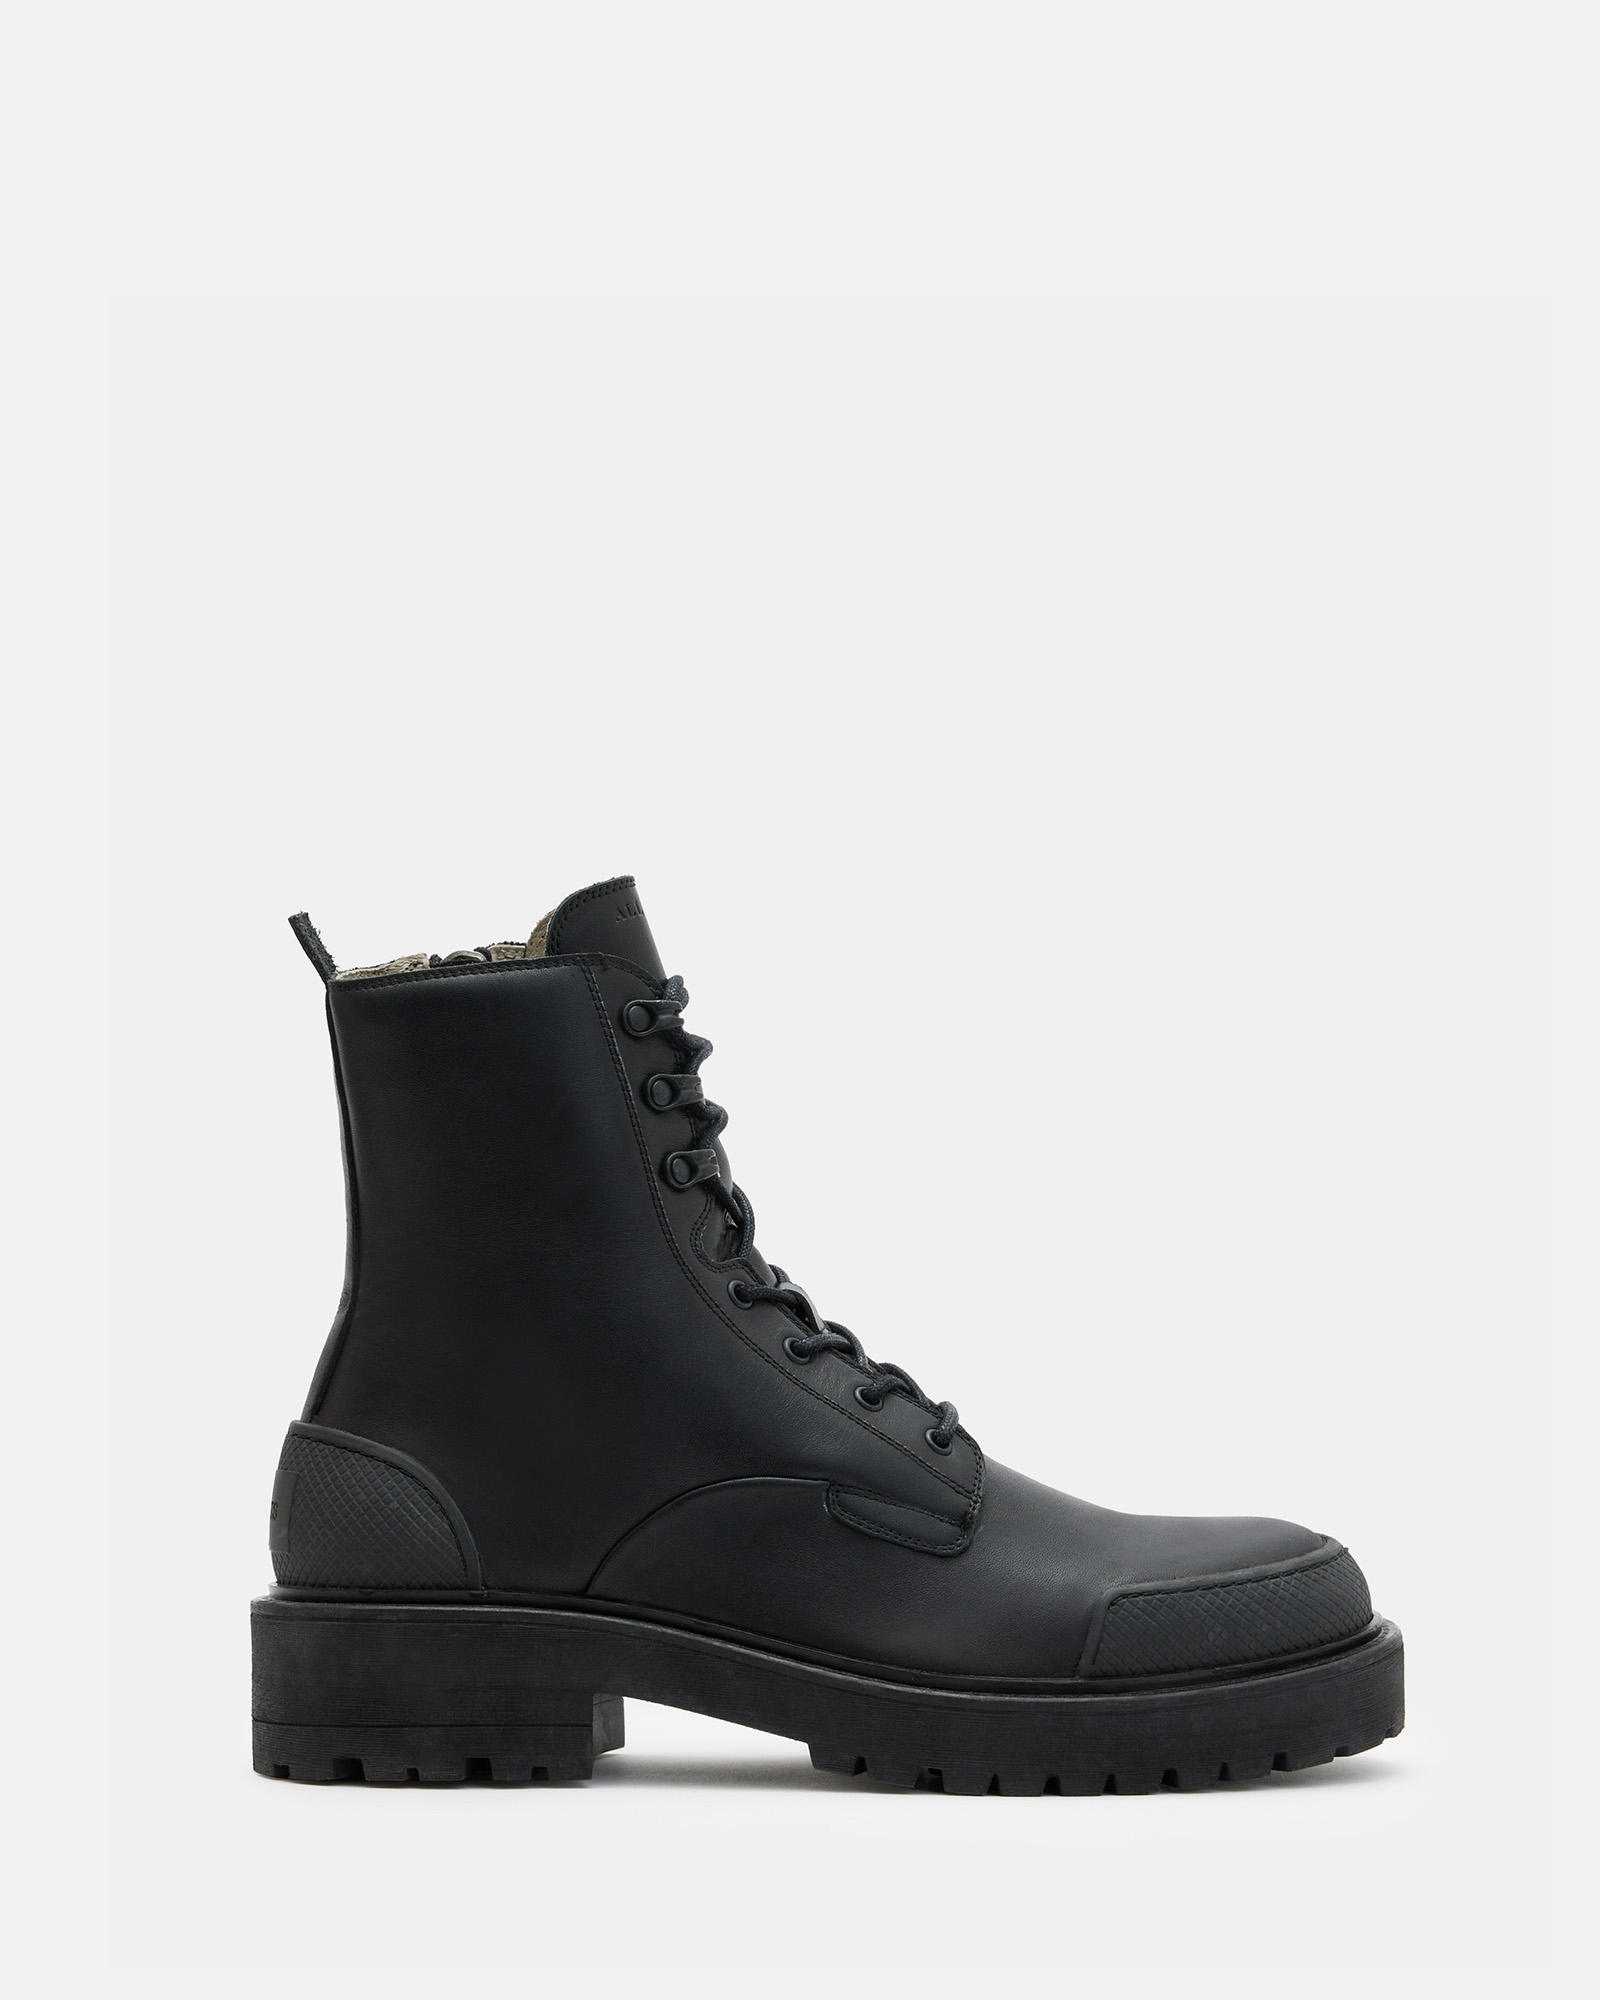 AllSaints Mudfox Lace Up Chunky Leather Boots,, Black